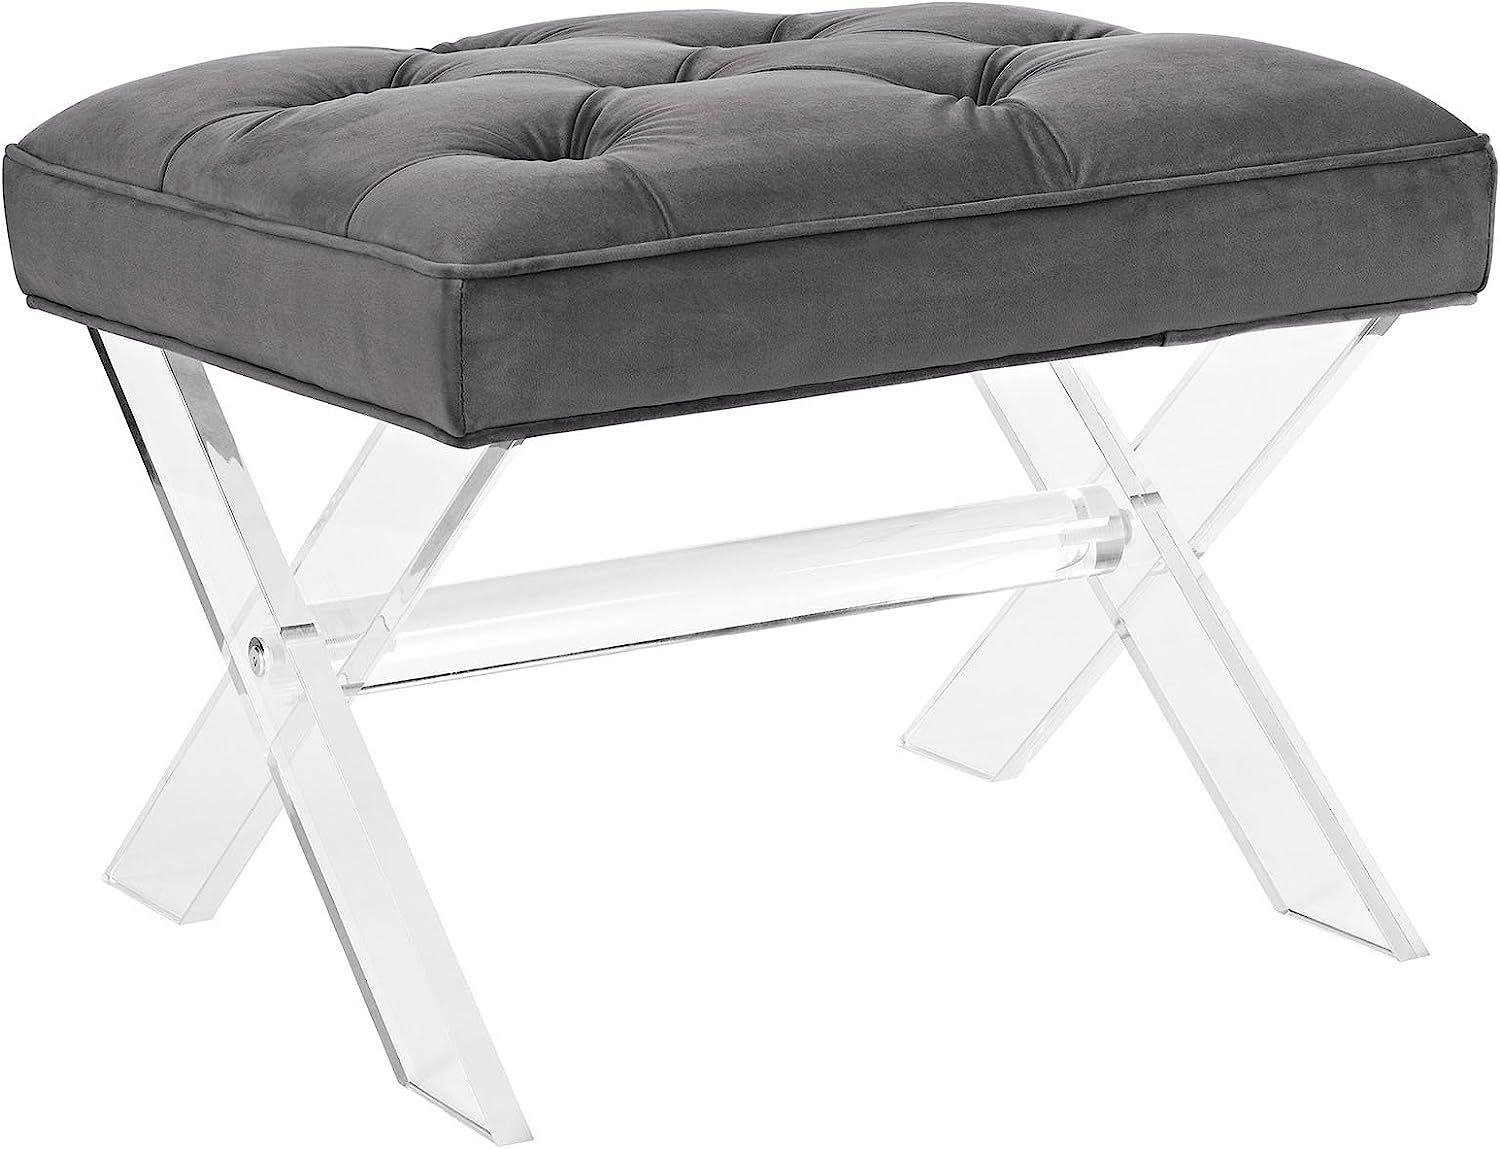 Modway Swift Acrylic X-Base Entryway Modern Bench With Tufted Fabric Upholstery in Gray | Amazon (US)